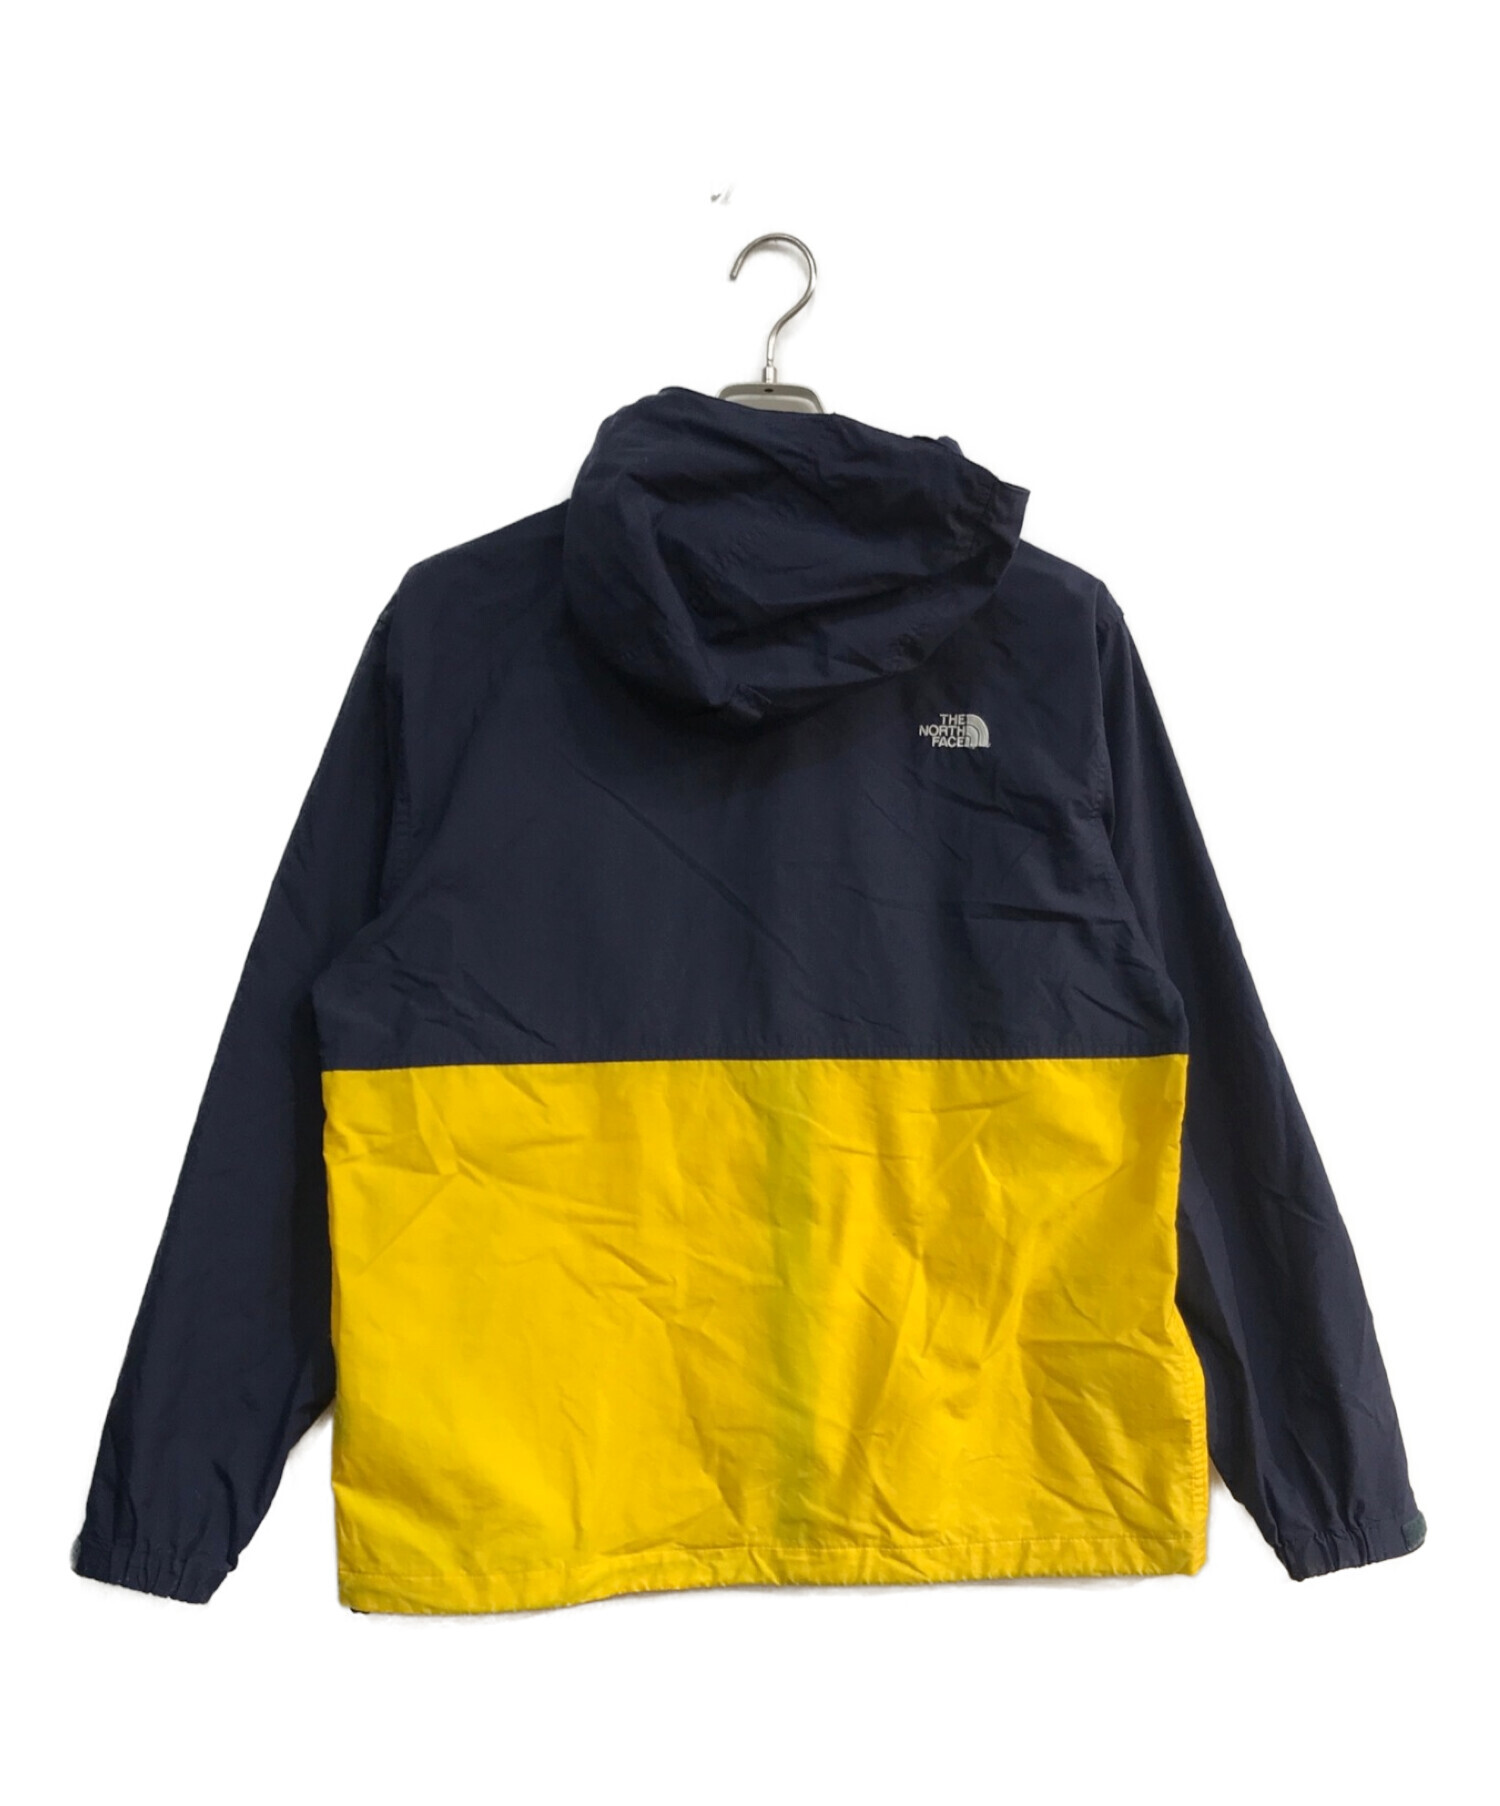 THE NORTH FACE NP71530 ナイロン コンパクトジャケットナイロン ...